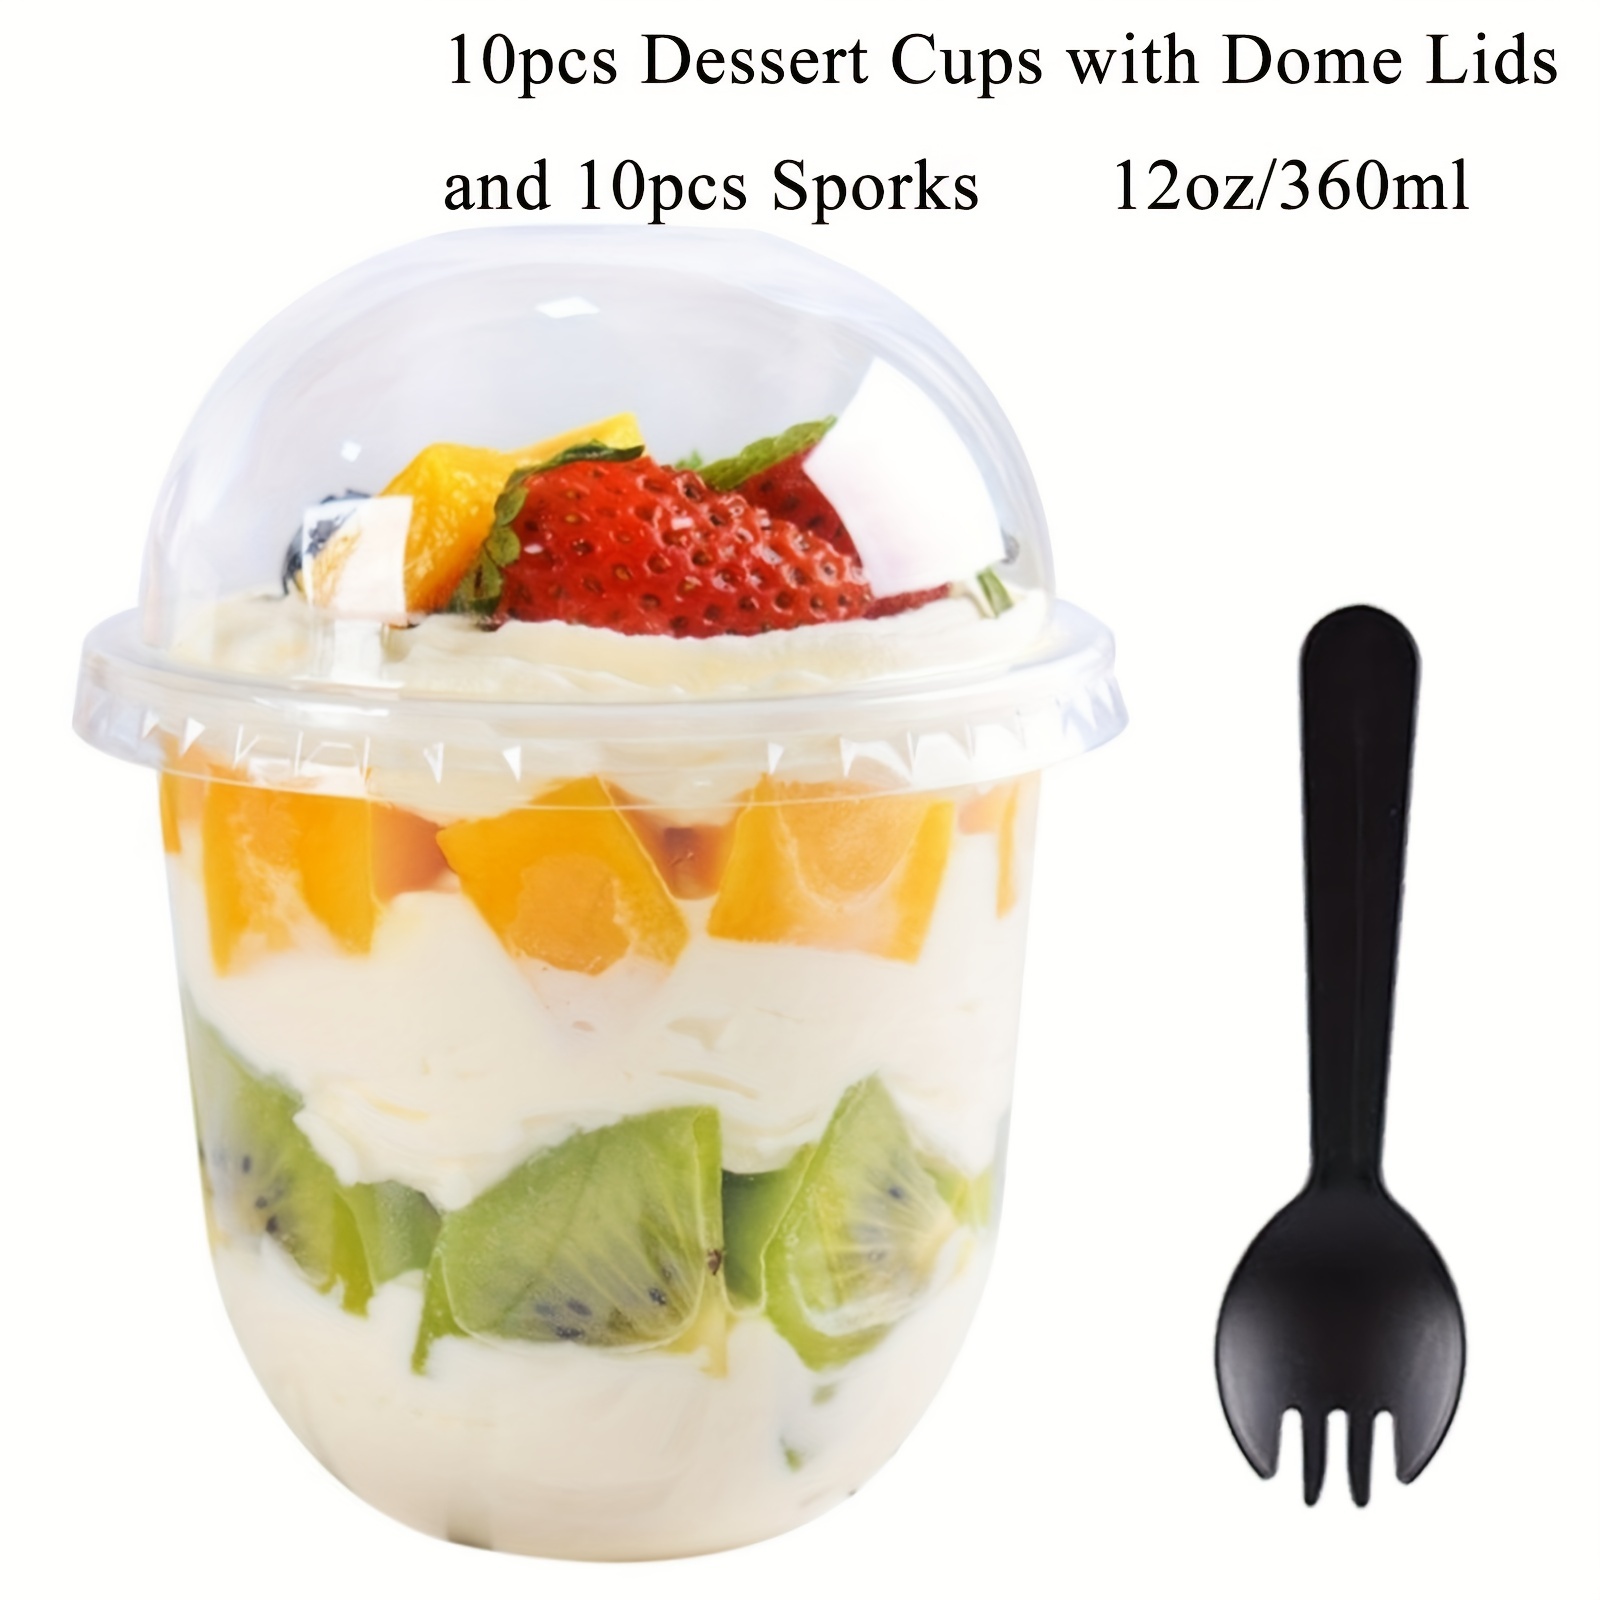 Disposable Snack And Drink Cup For Dessert